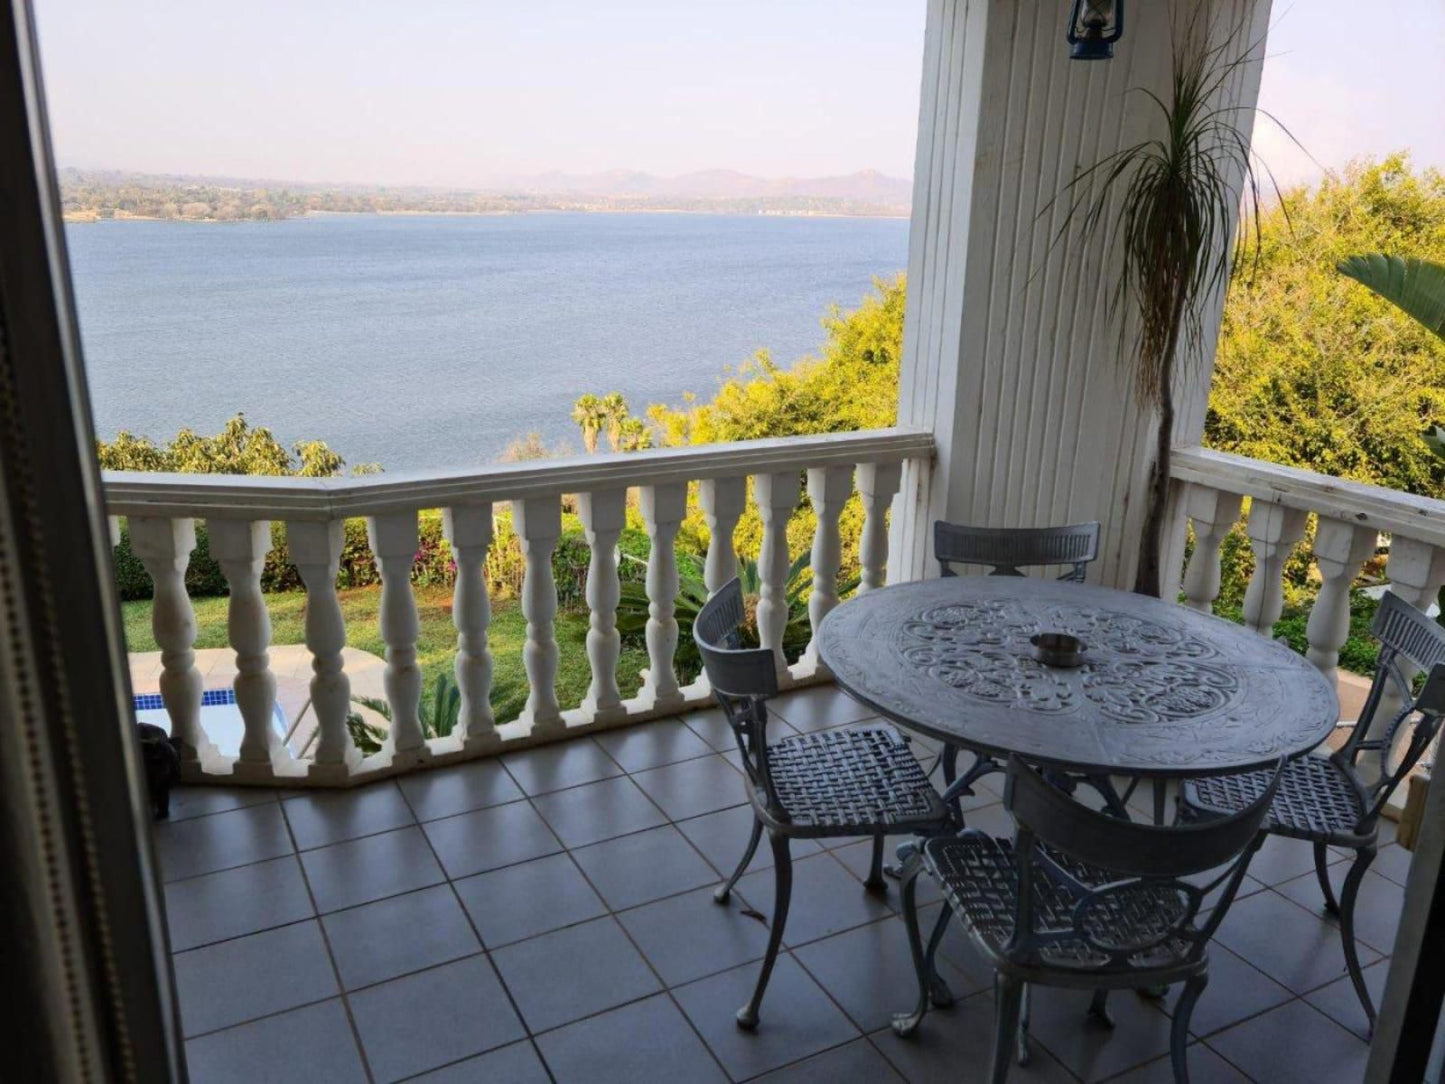 Kosmos View Luxury Self Catering Apartments Kosmos Hartbeespoort North West Province South Africa Lake, Nature, Waters